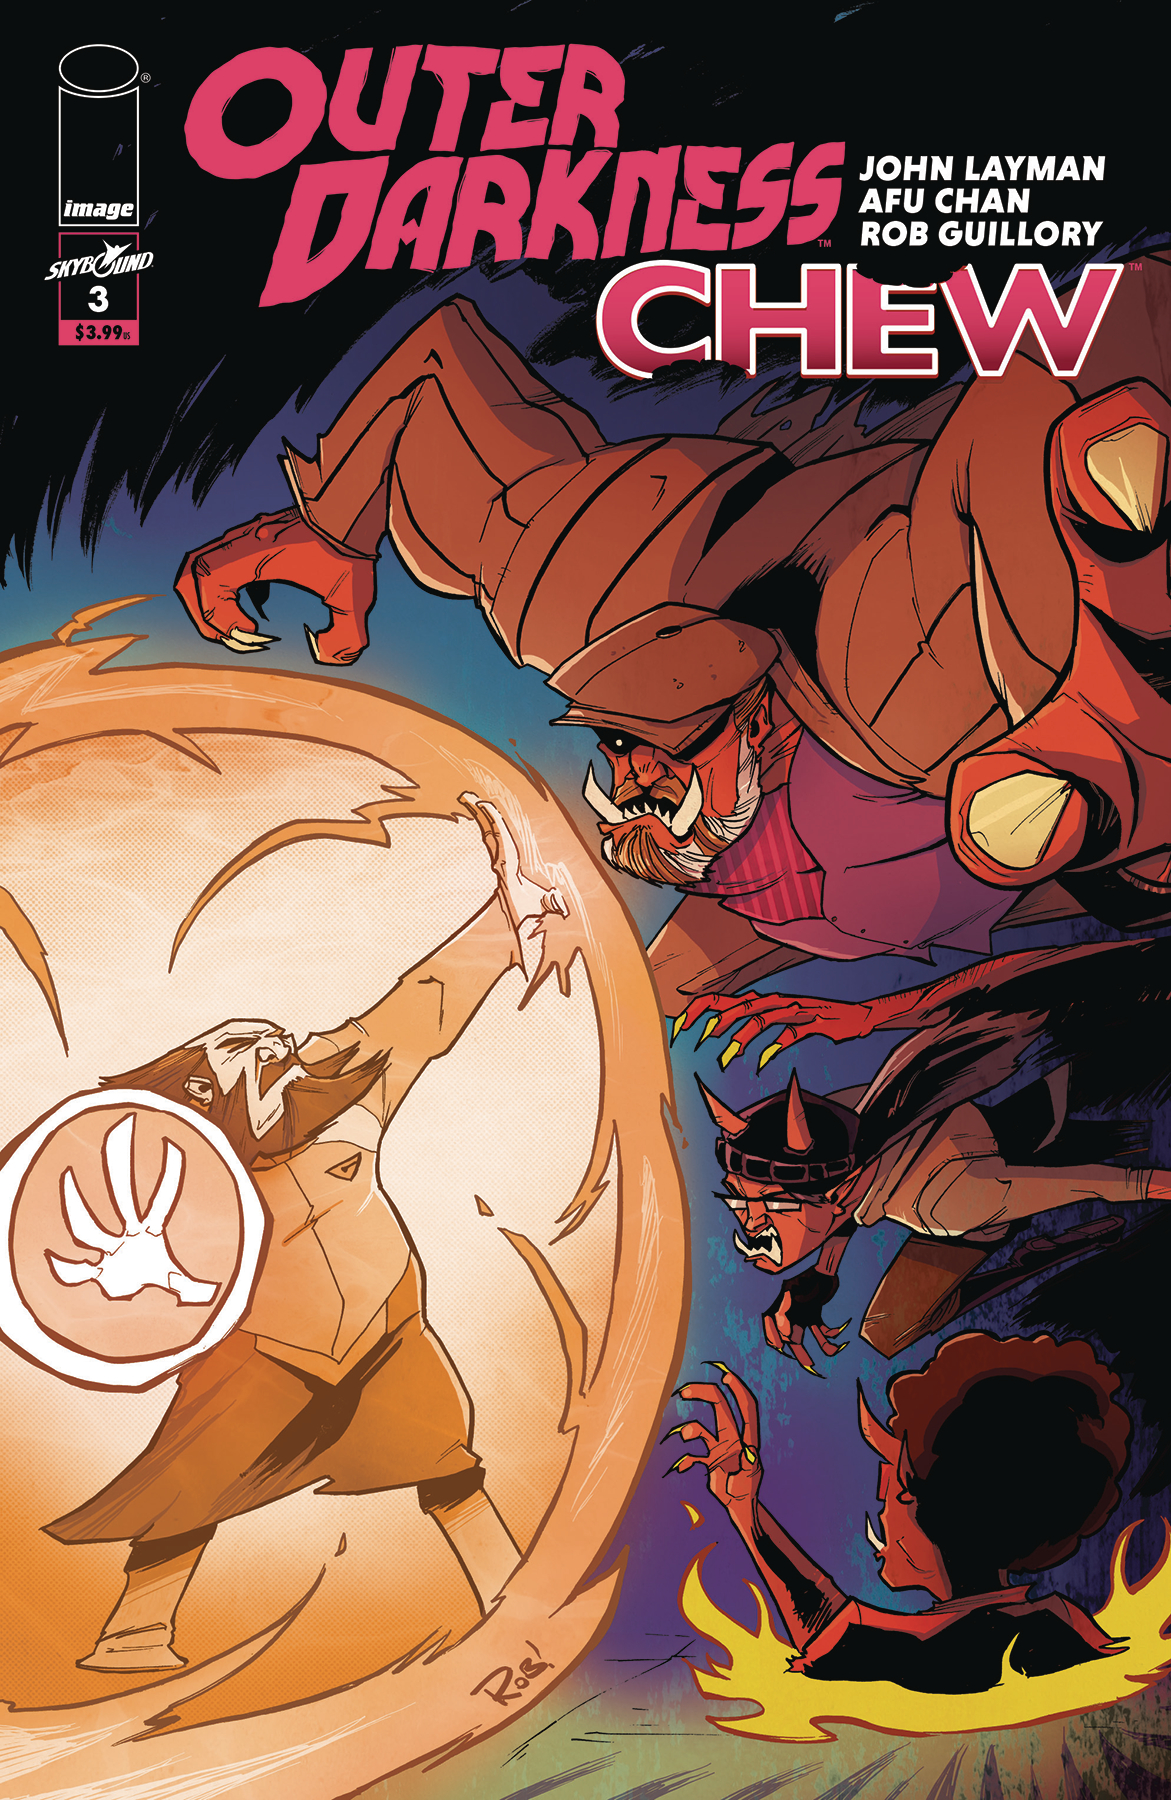 OUTER DARKNESS CHEW #3 (OF 3) CVR B GUILLORY (MR)